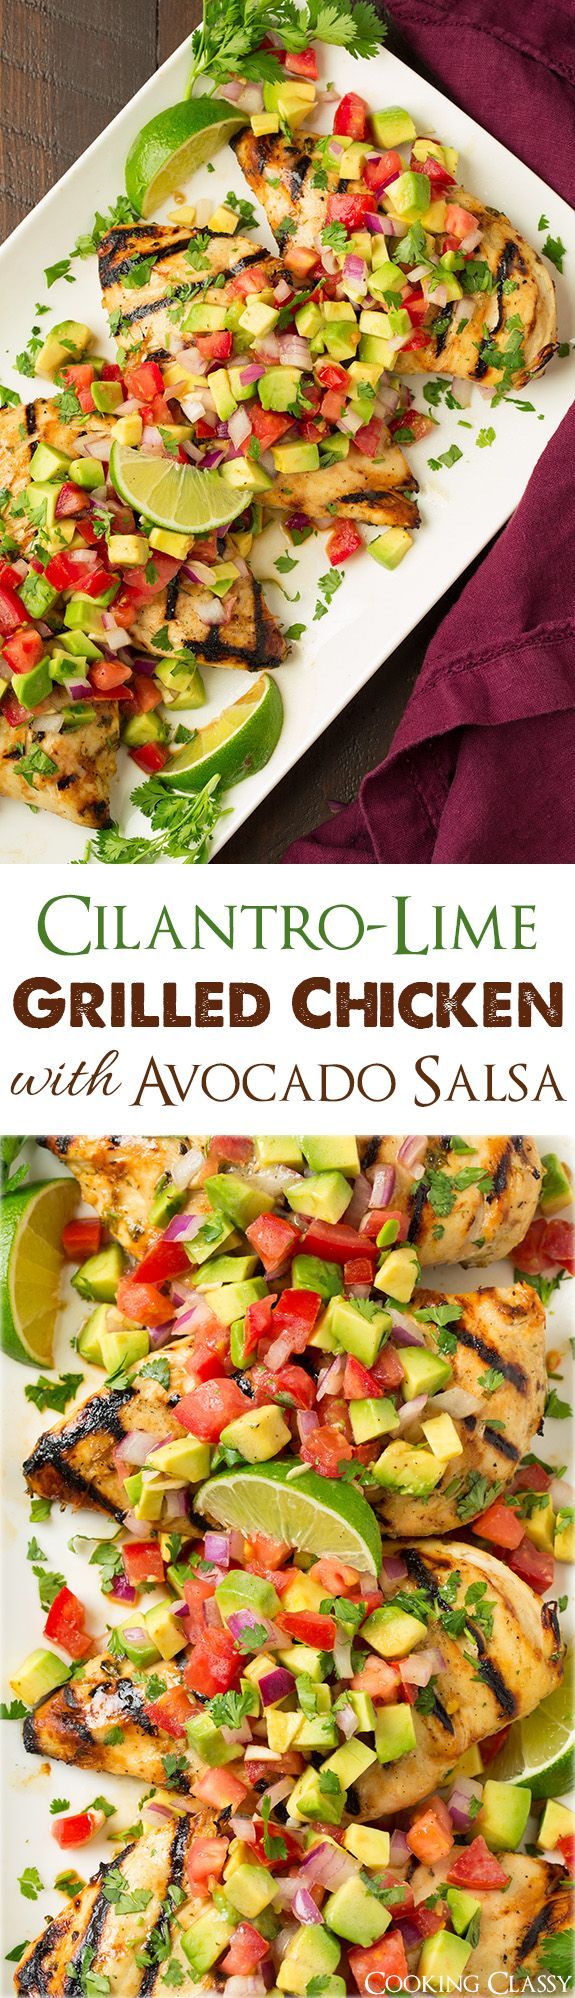 Grilled Cilantro Lime Chicken with Avocado Salsa – easy to prepare, healthy, amazingly flavorful and delicious! Anything is good